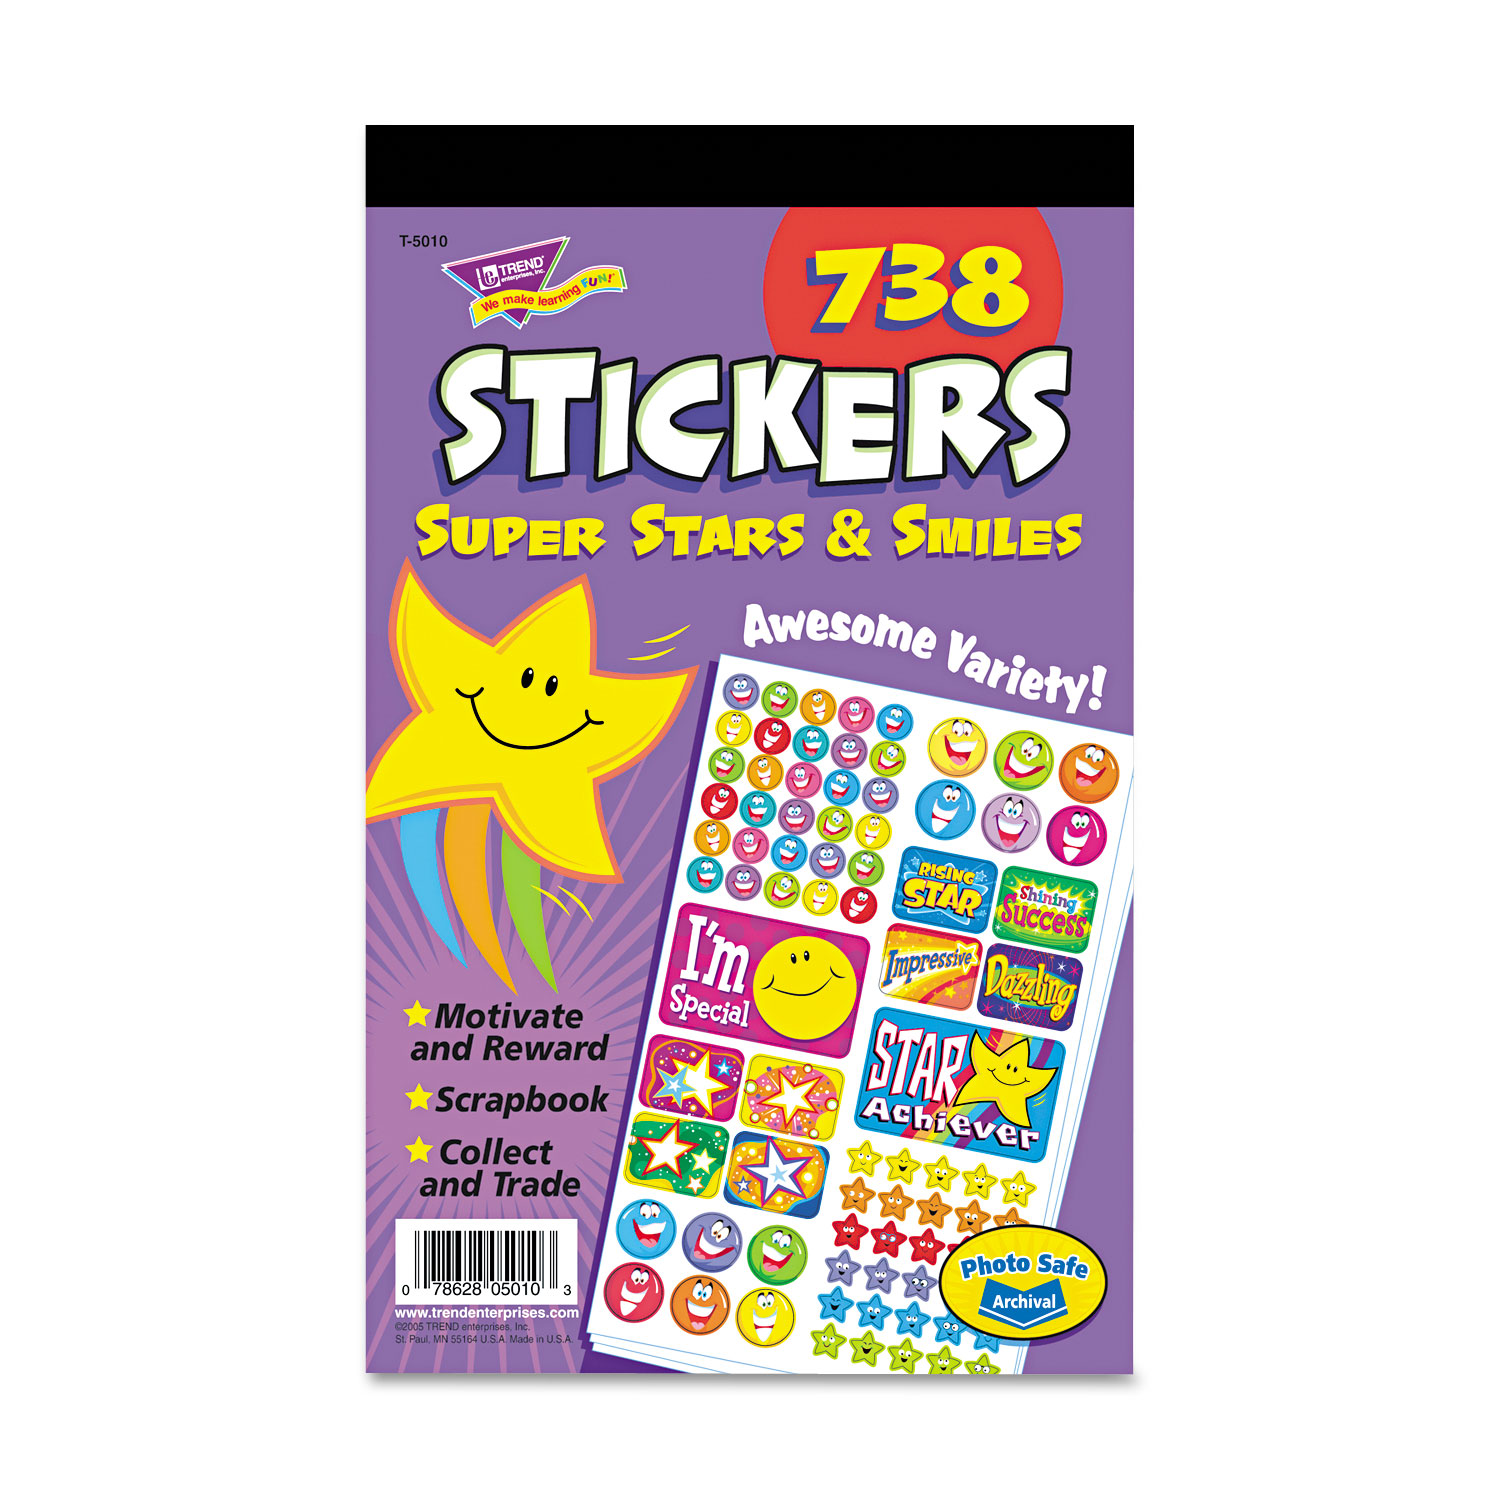 Sticker Assortment Pack, Super Stars and Smiles, 738 Stickers/Pad